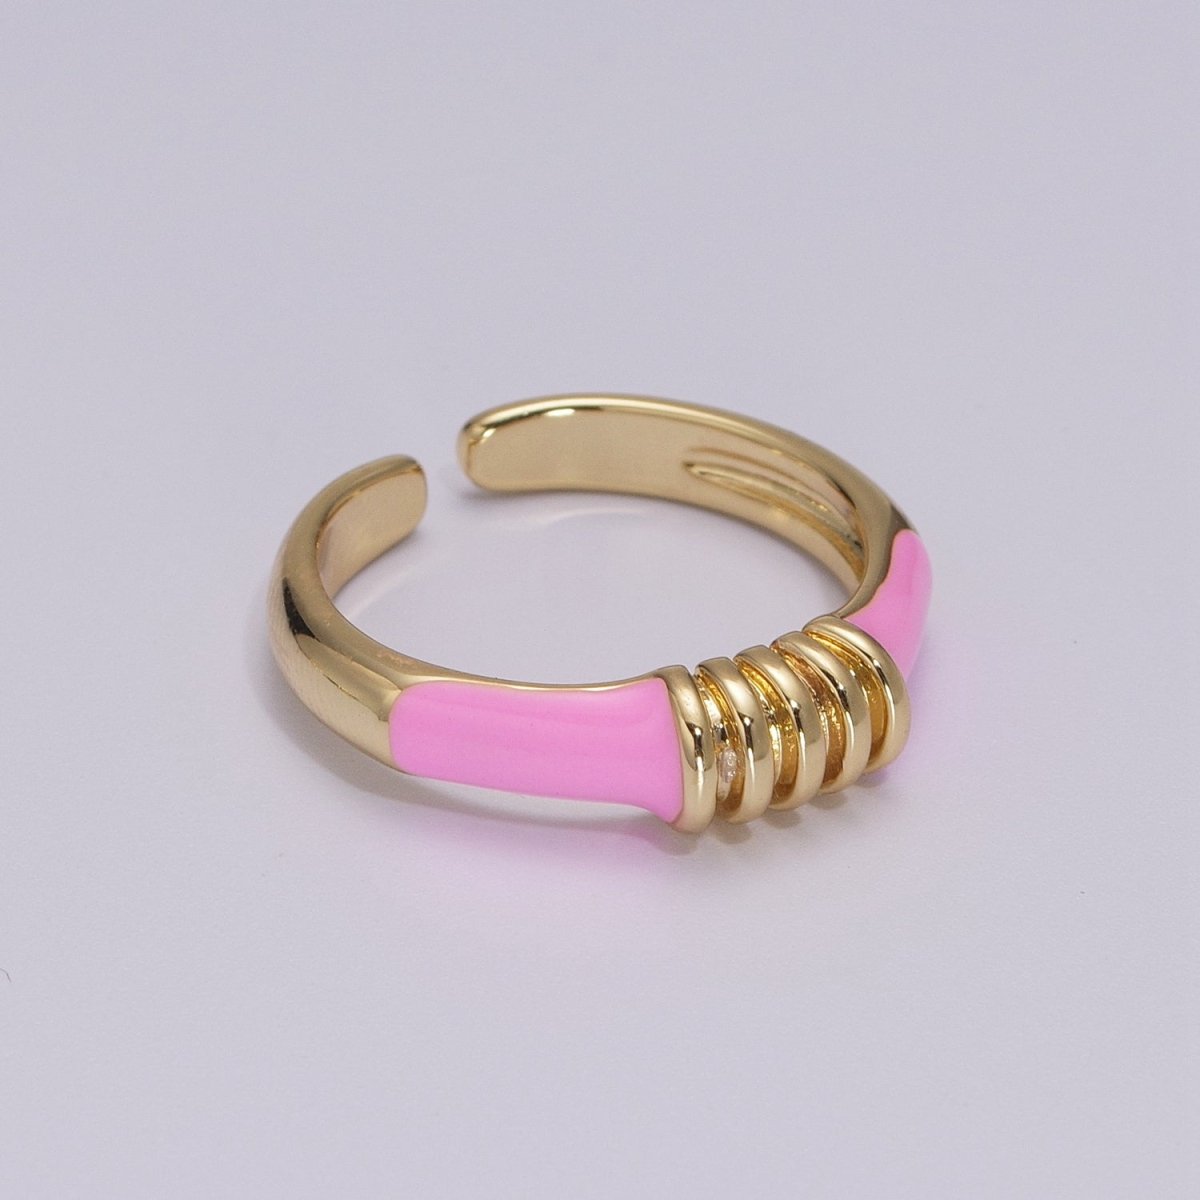 Colorful Pastel Enamel Ring • Gold Filled Multicolor Open Band • Green Pink Black White Minimalist Stackable Ring U-115~U-118 - DLUXCA